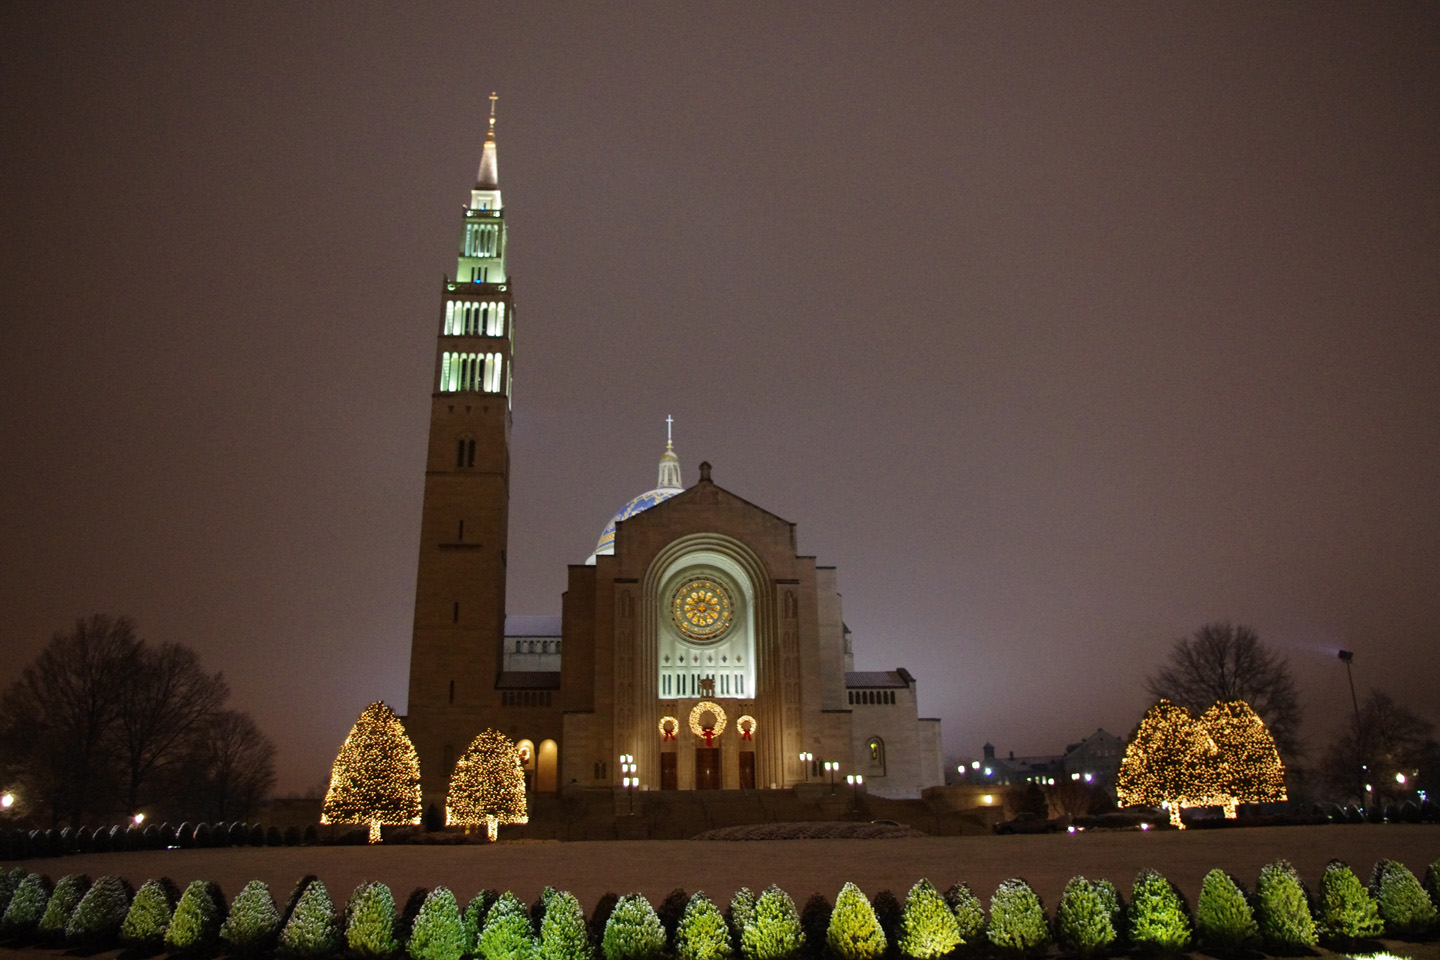 web-basilica-of-national-shrine-of-the-immaculate-conception_george-lewis-cc